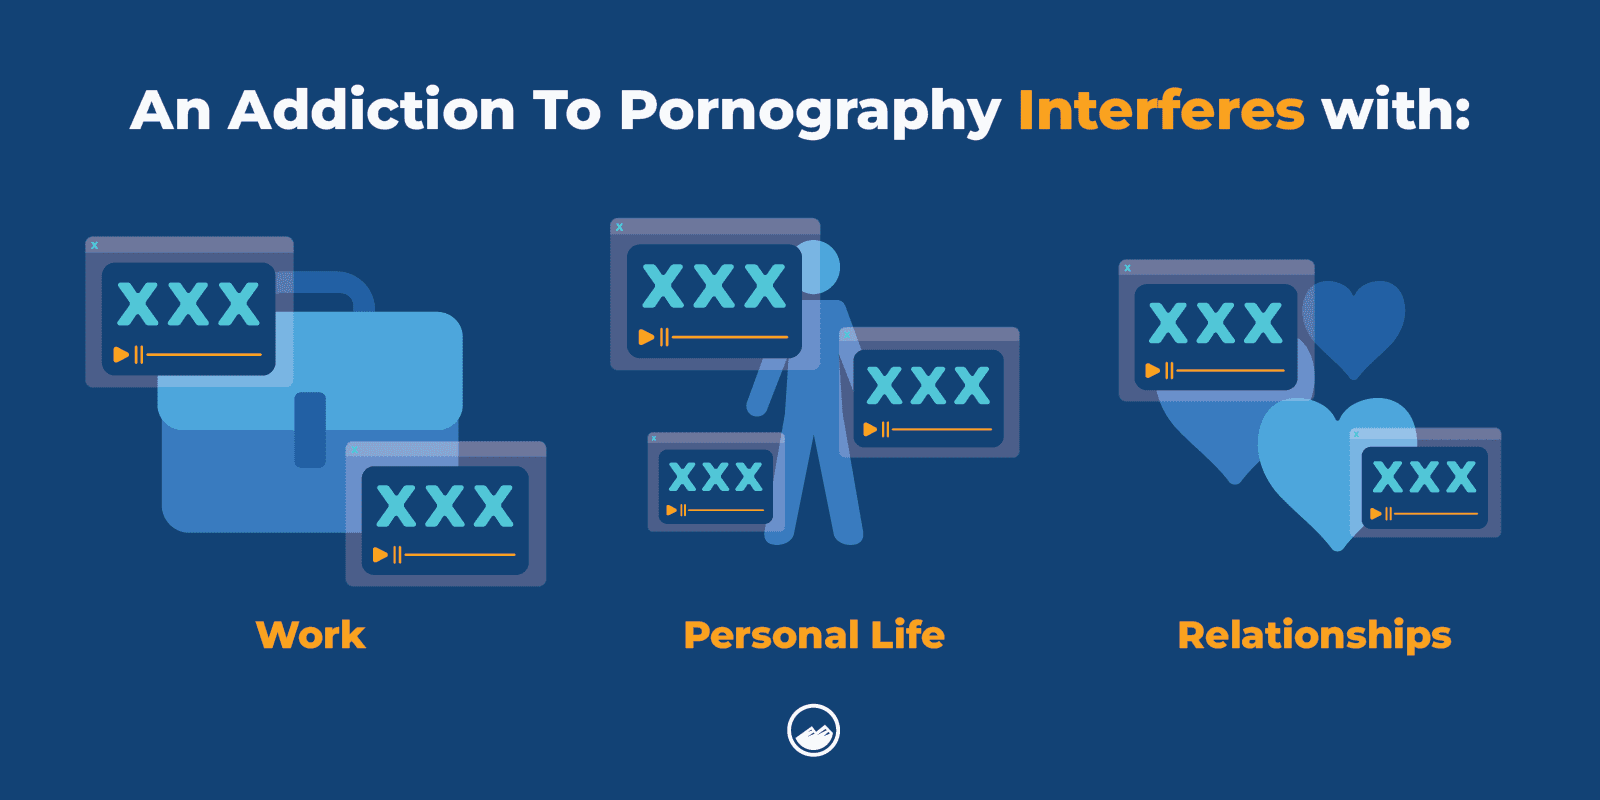 Porn Addiction: 11+ Signs, Symptoms, & Effects of Pornography